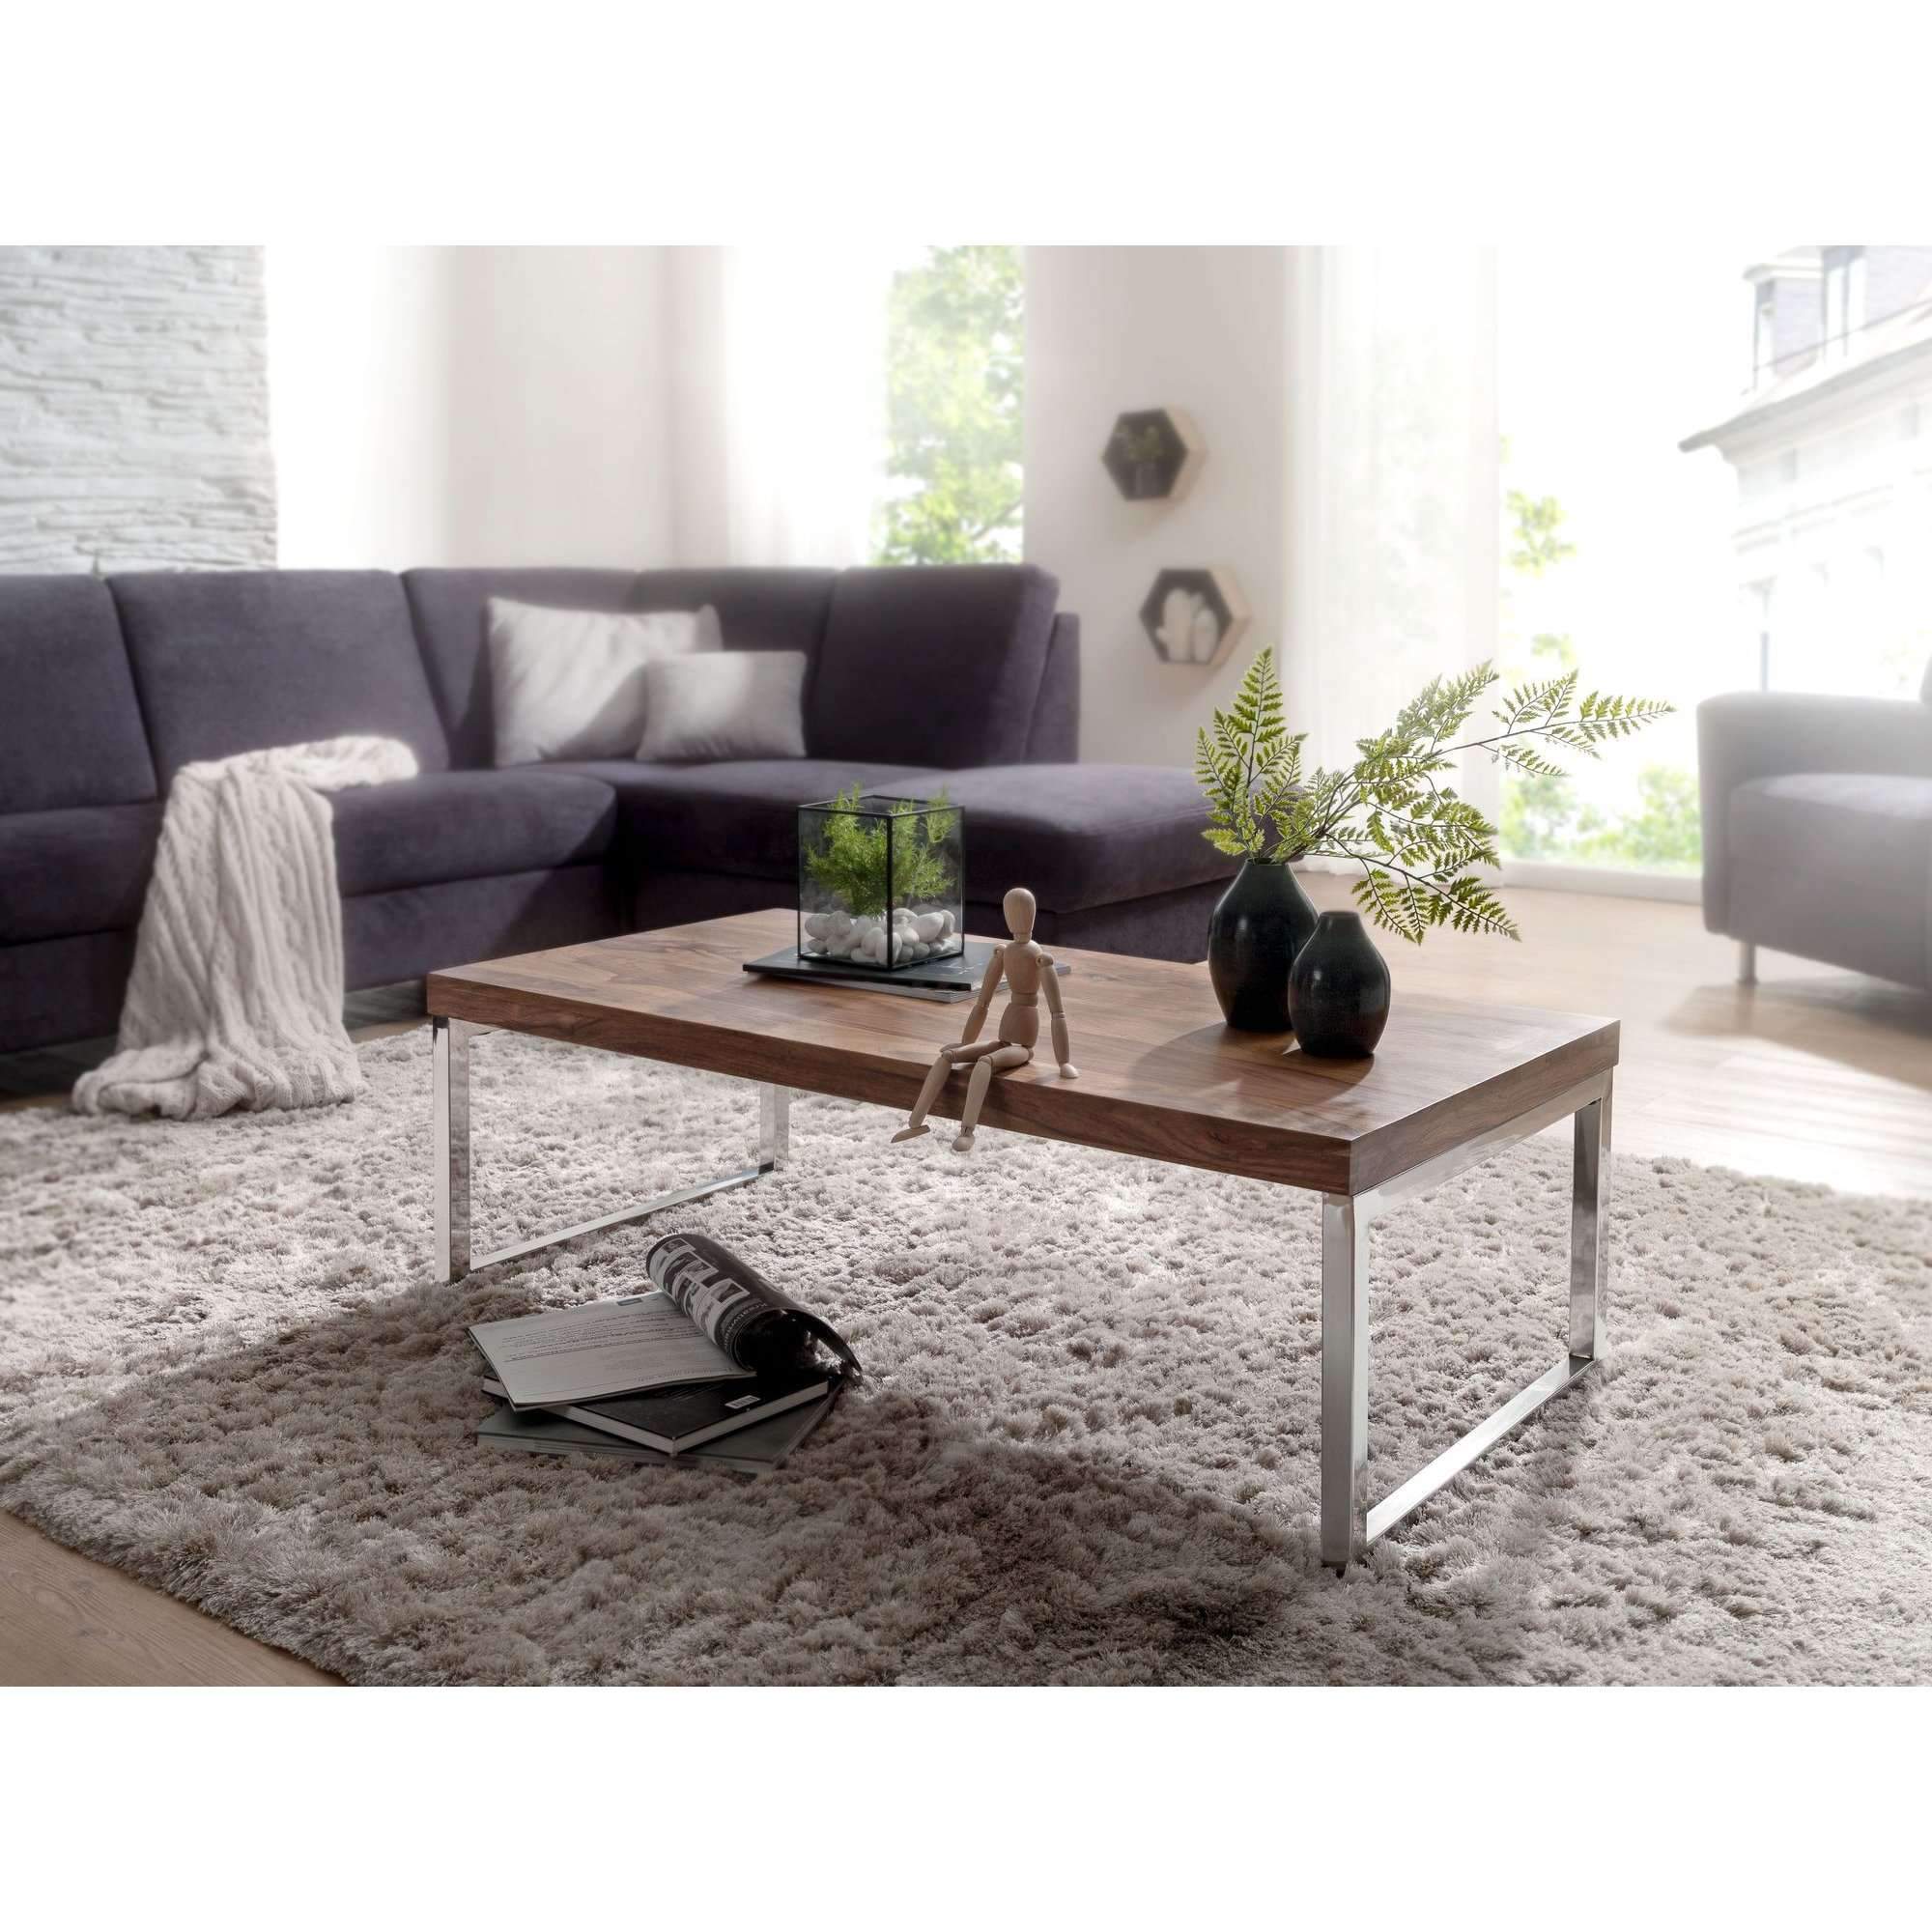 Nancy's Dunning Modern Wooden Coffee Table - Side table - Table - Coffee tables - Table